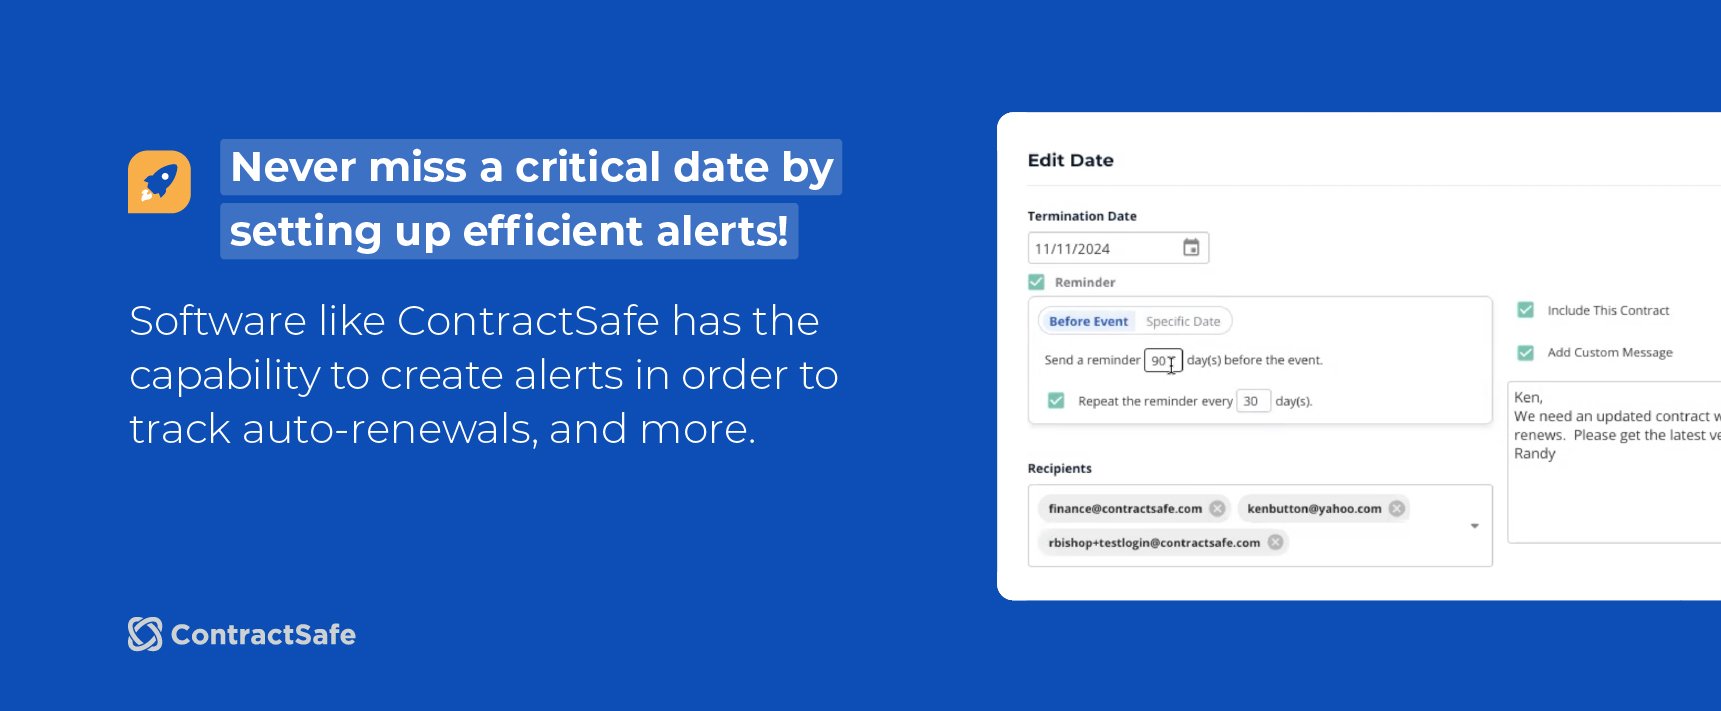 Never miss a critical date by setting up efficient alerts! Software like ContractSafe has the capability to create alerts in order to track auto-renewals, and more.